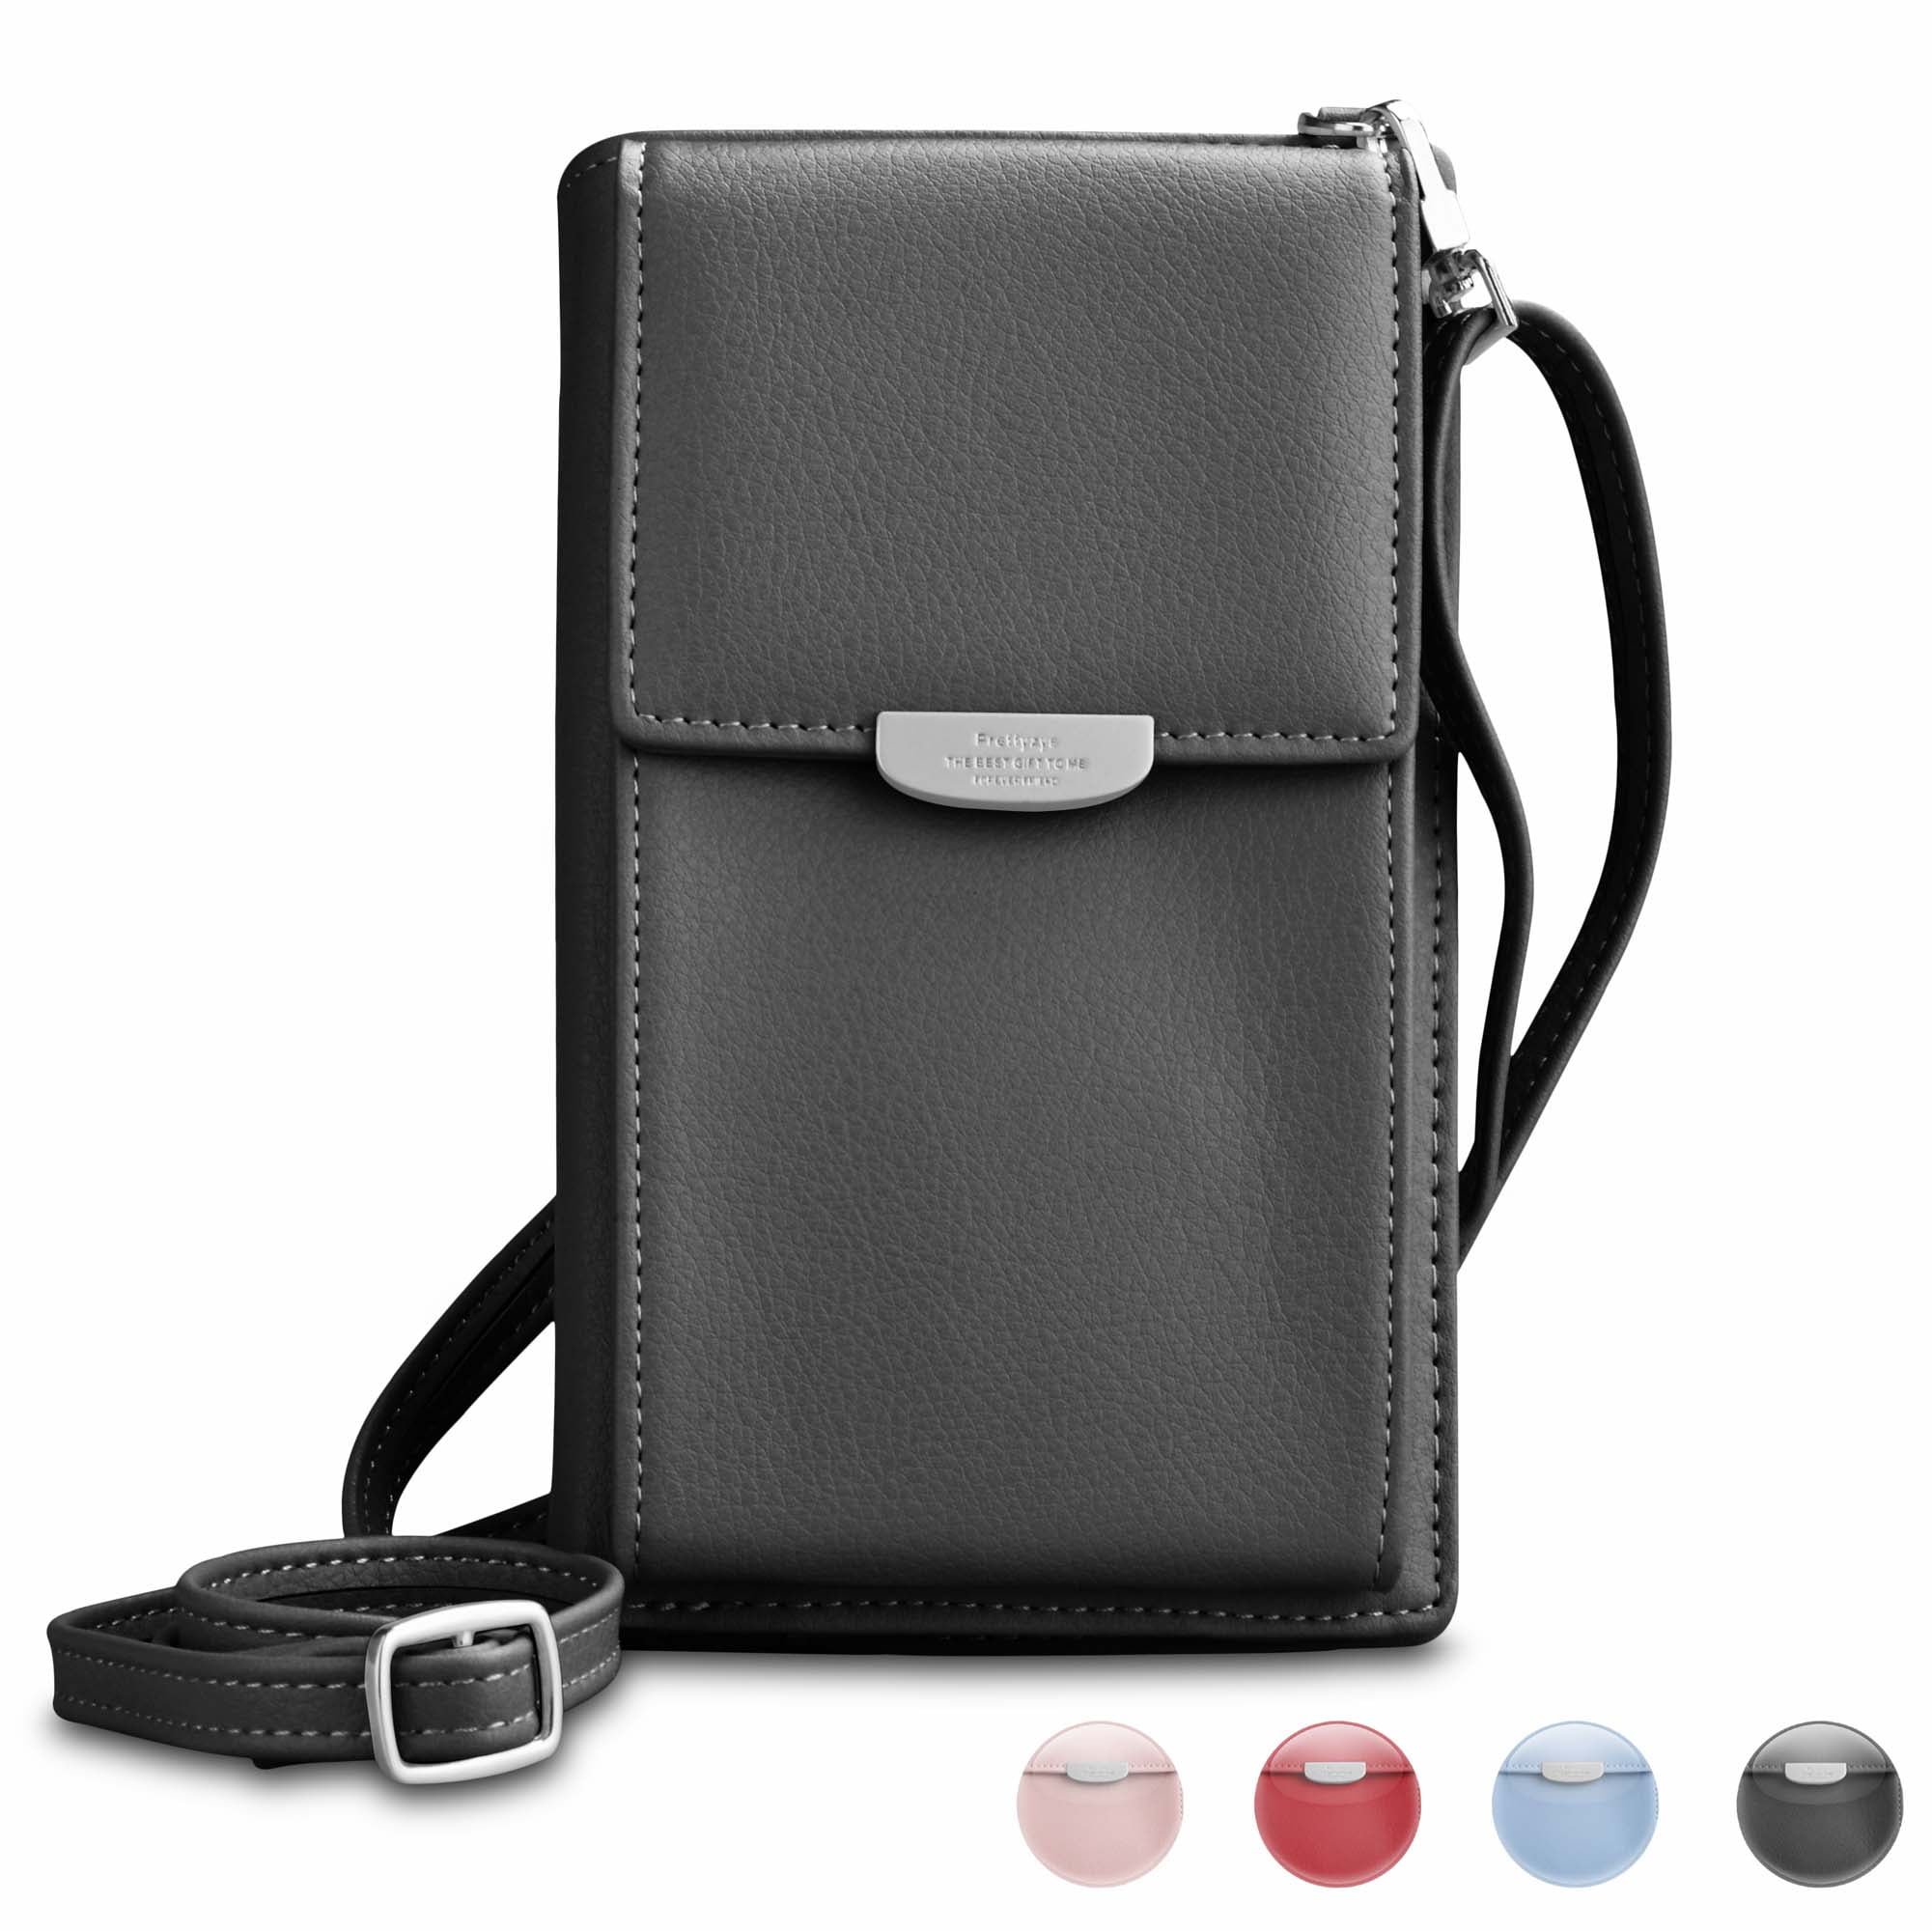 Womens Wallet Purse Shoulder Bags Pu Leather Coin Cell Phone Mini Cross-body Bag